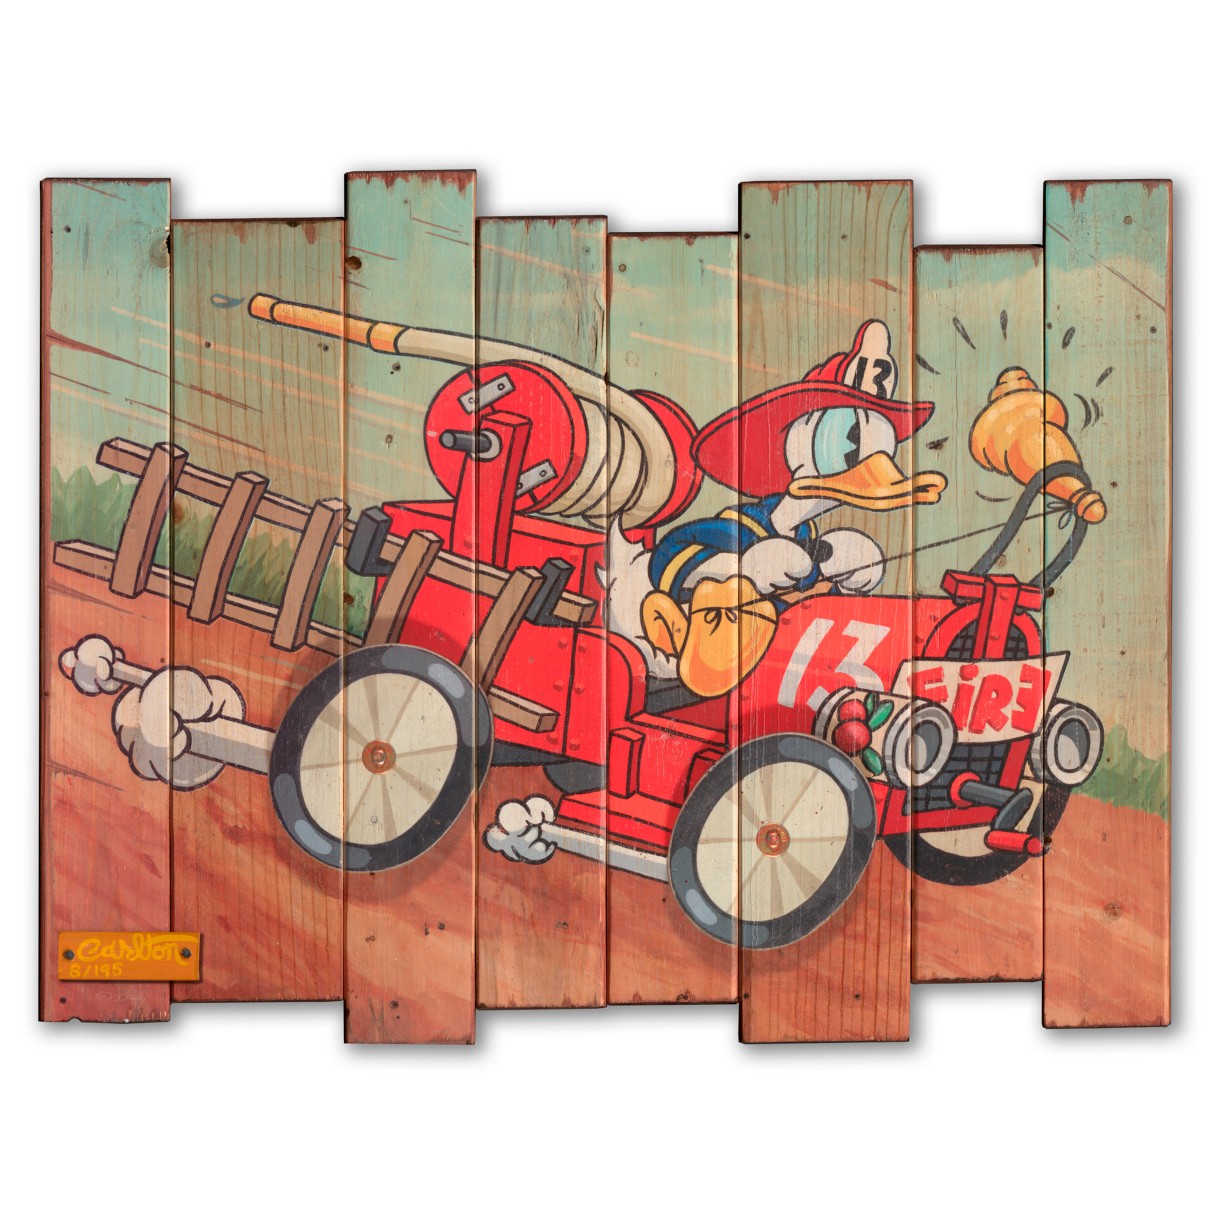 Donald Duck ''Fire Chief Donald'' Signed Giclée on Wood by Trevor Carlton – Limited Edition